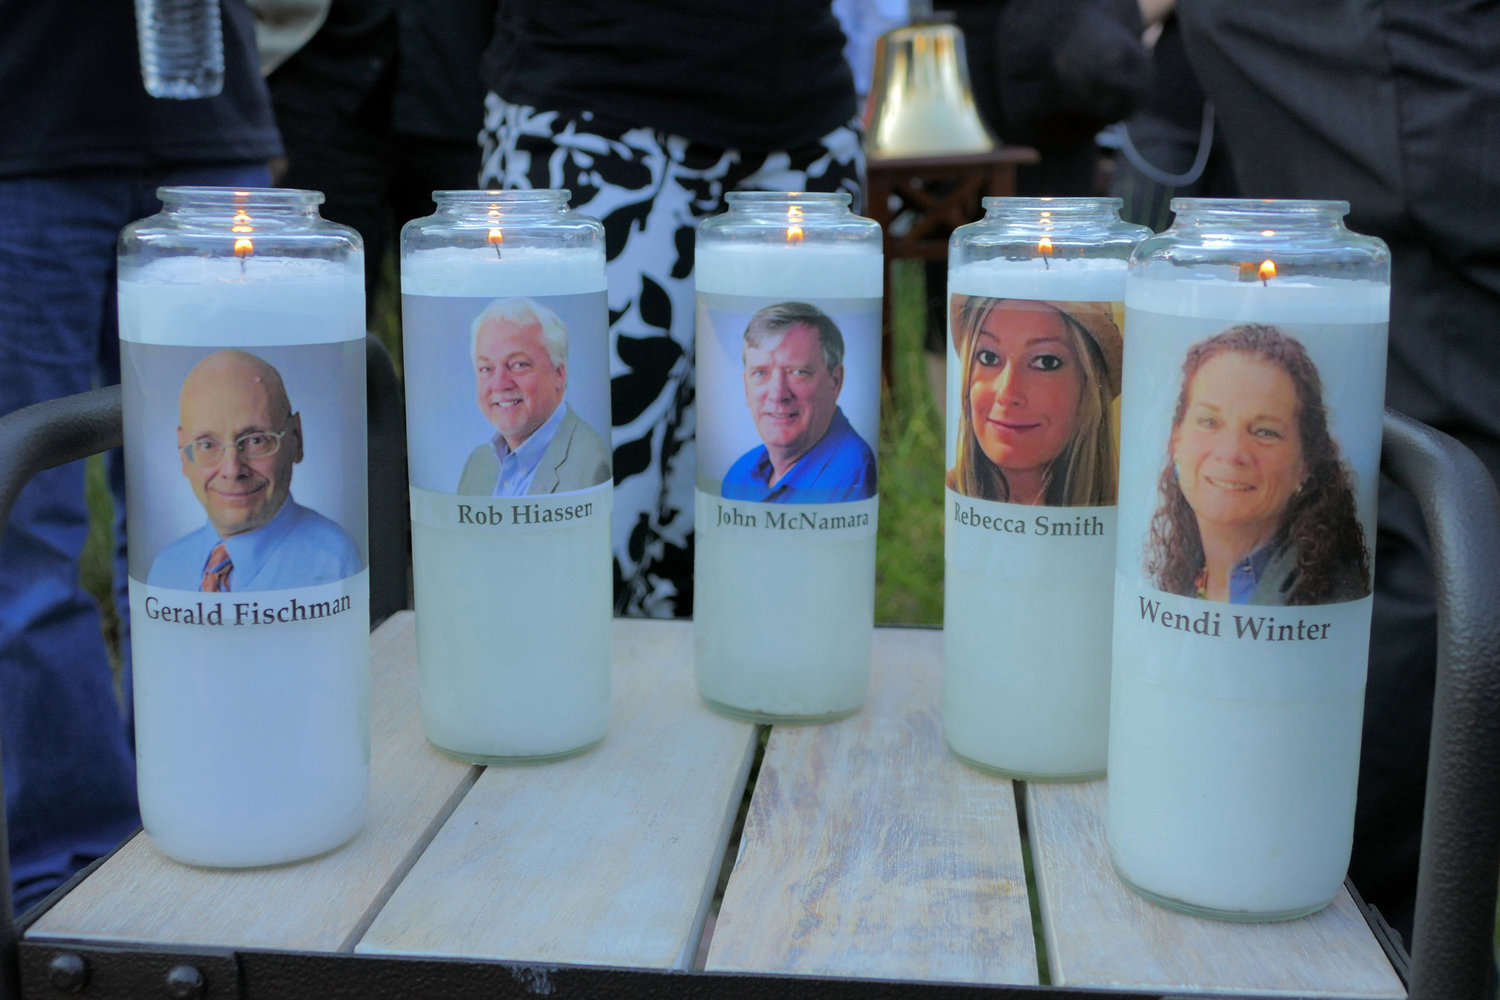 Candles honoring Gerald Fischman, Rob Hiassen, John McNamara, Rebecca Smith, and Wendi Winters flicker as the sun sets during a candlelight vigil on June 29, 2018, at Annapolis Mall for the five Capital Gazette employees slain during a shooting spree in their newsroom.